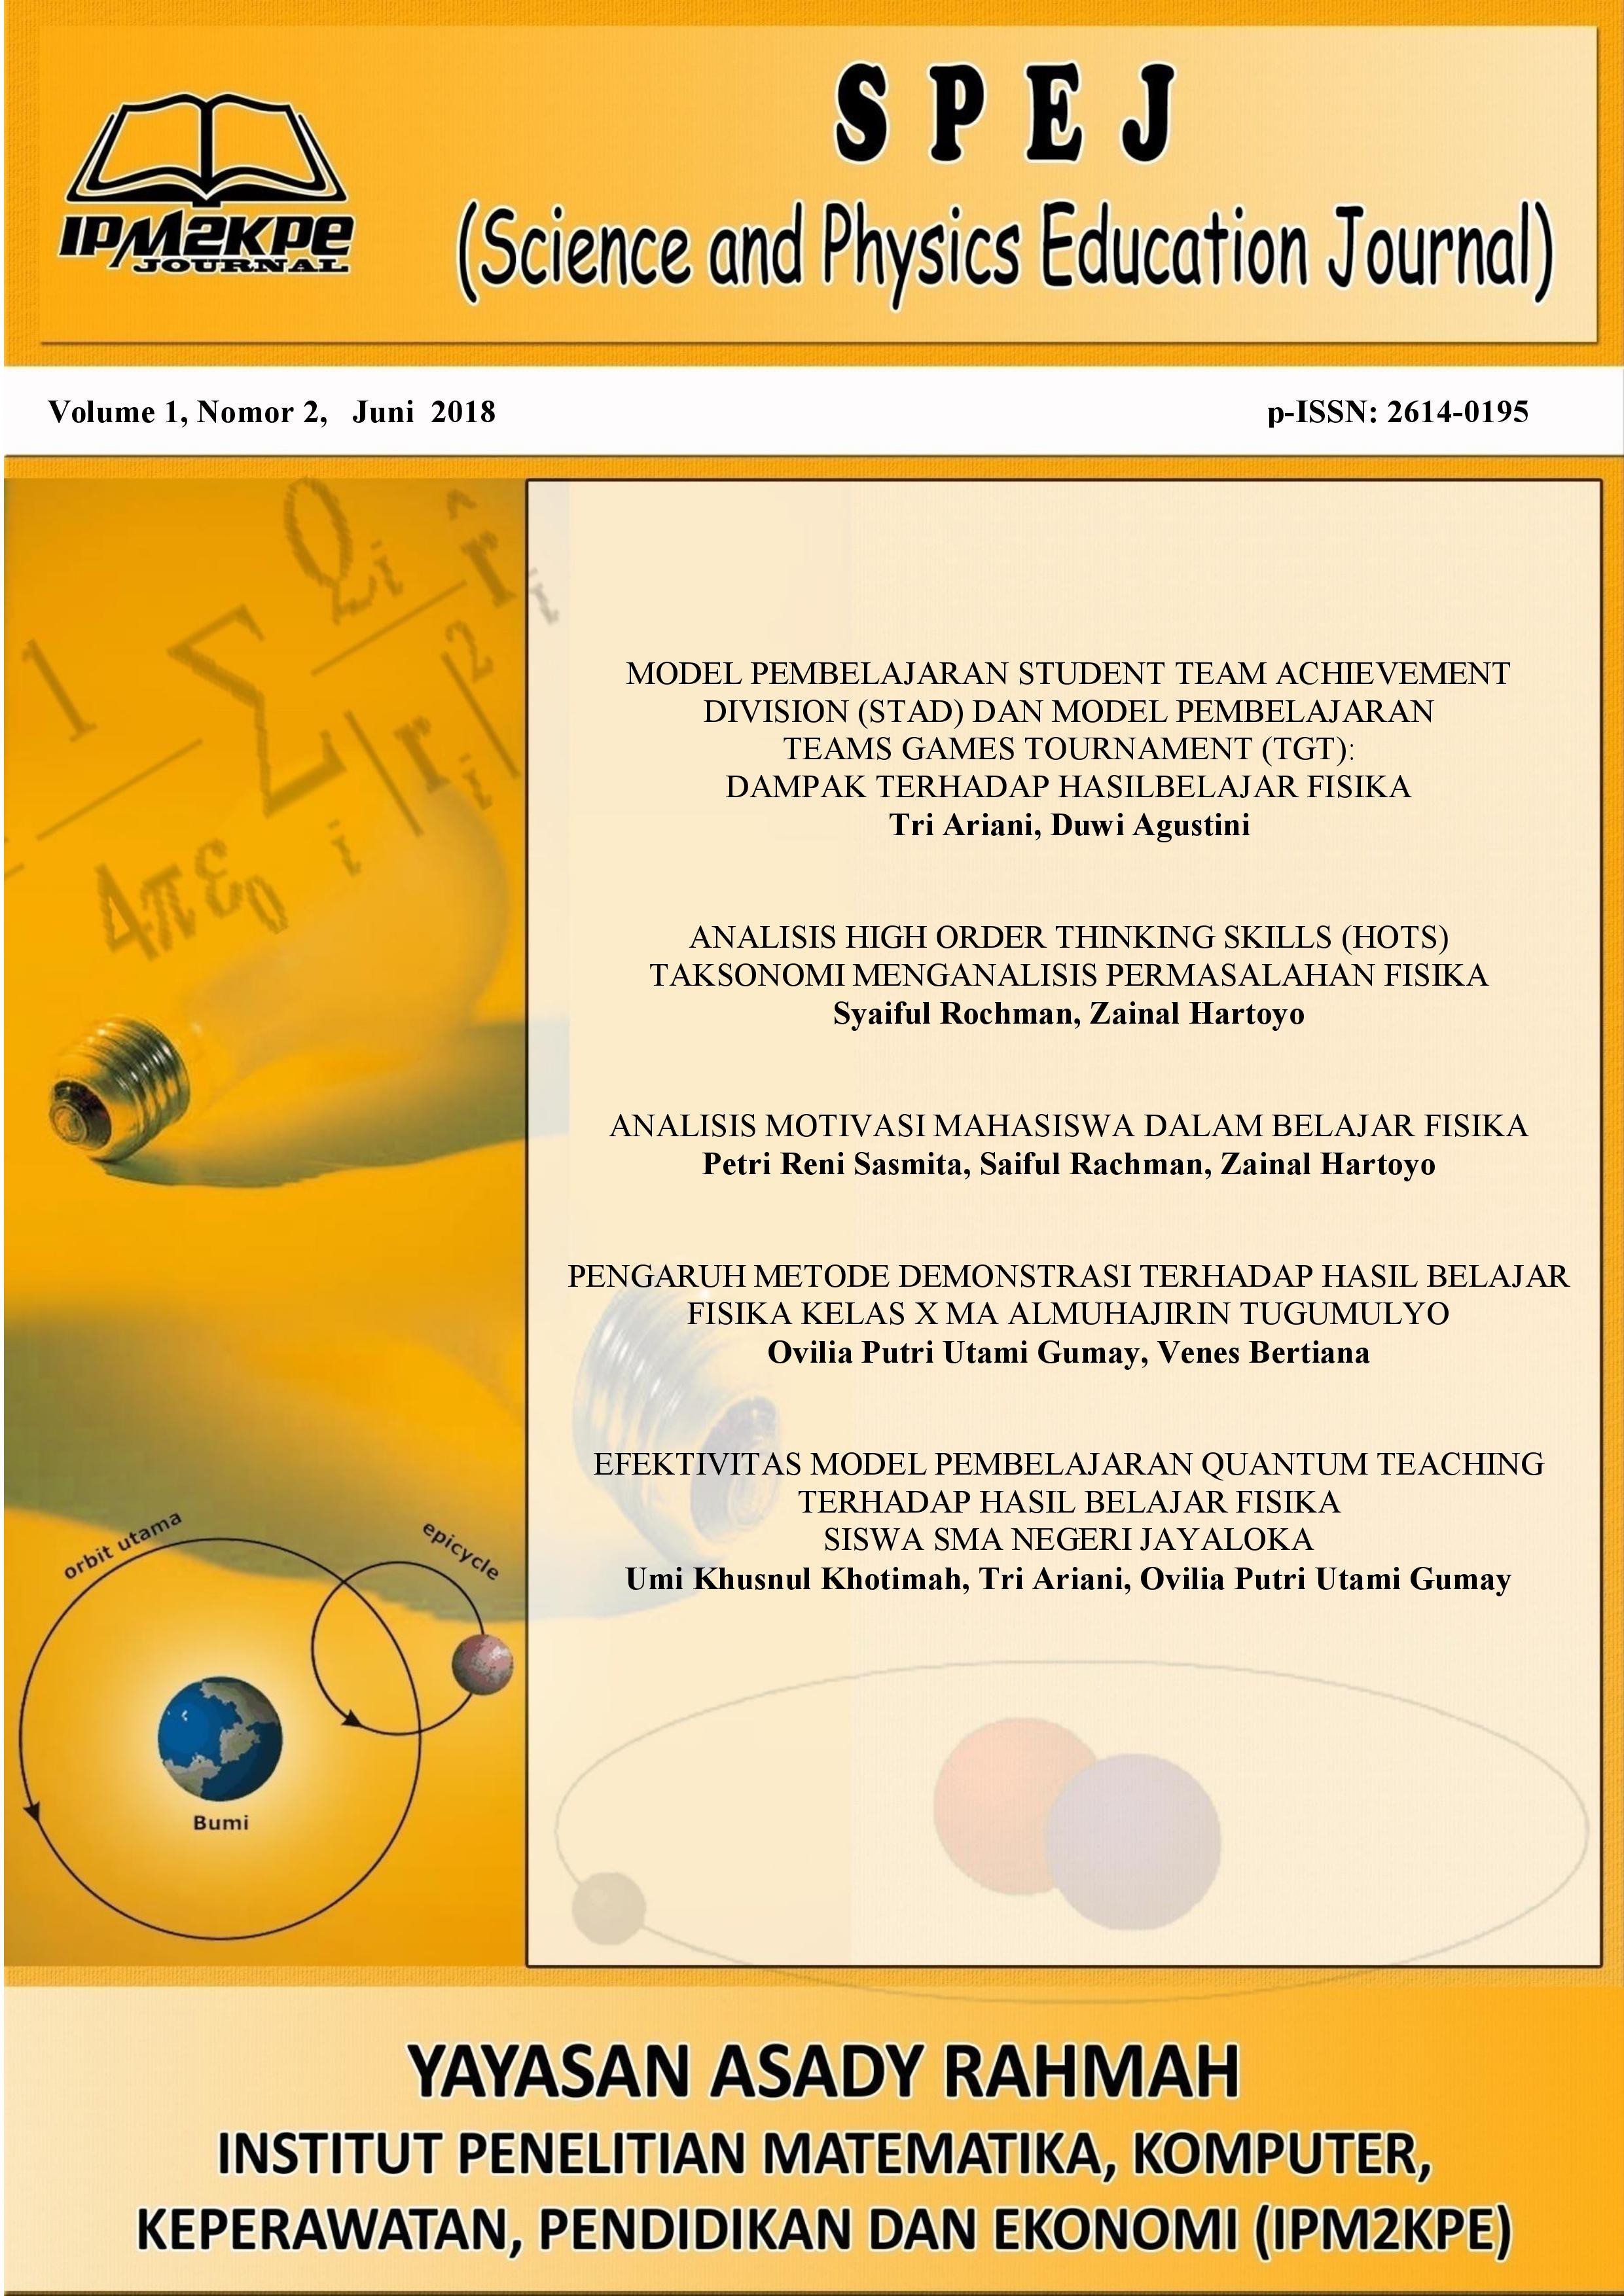 Science and Physics Education Journal